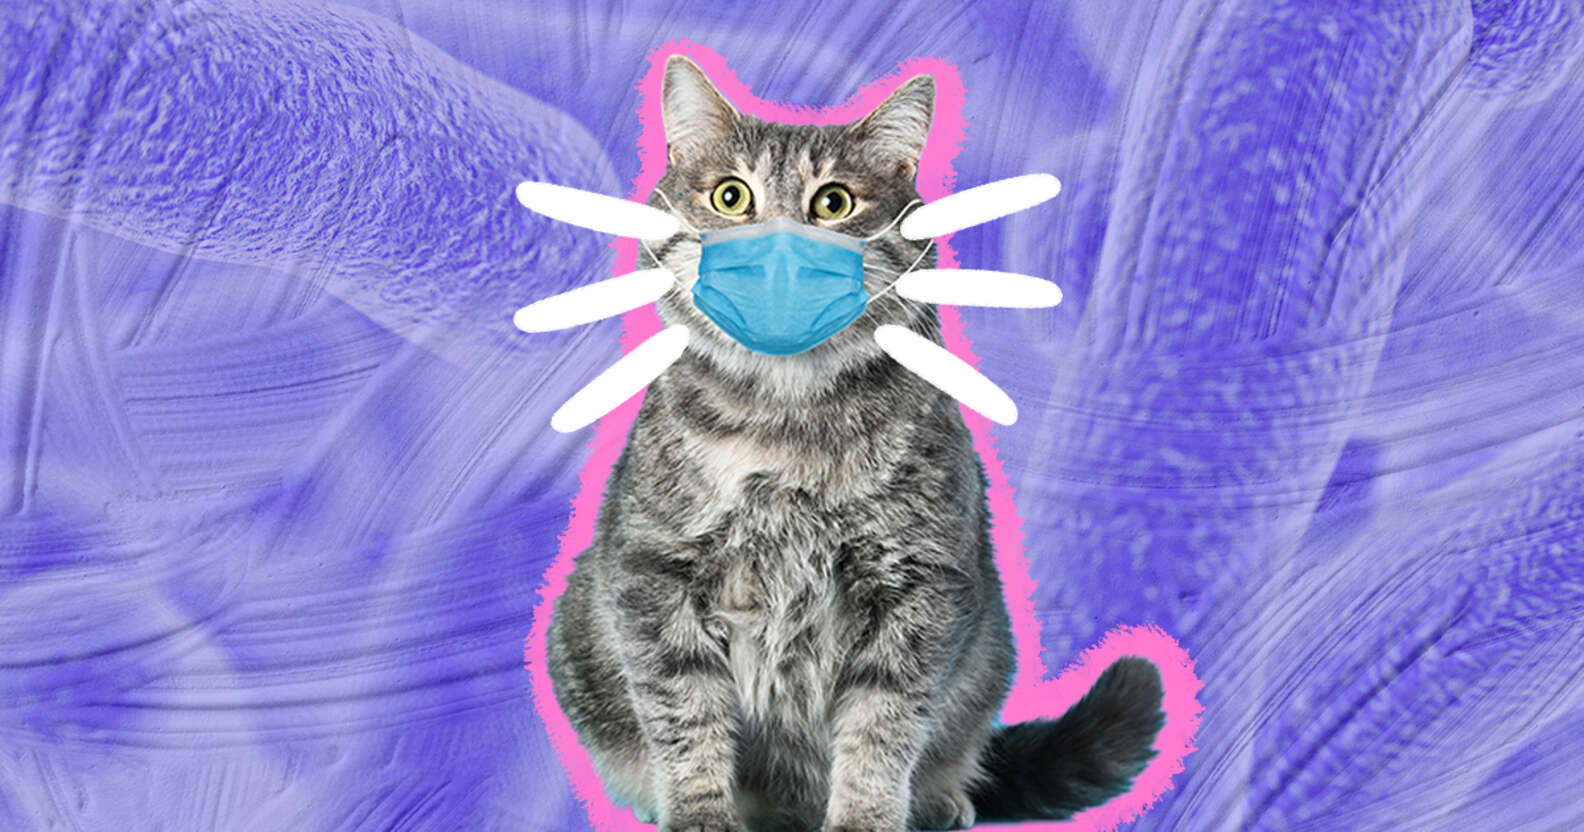 Can You Get Sick From Your Cat? - DodoWell - The Dodo